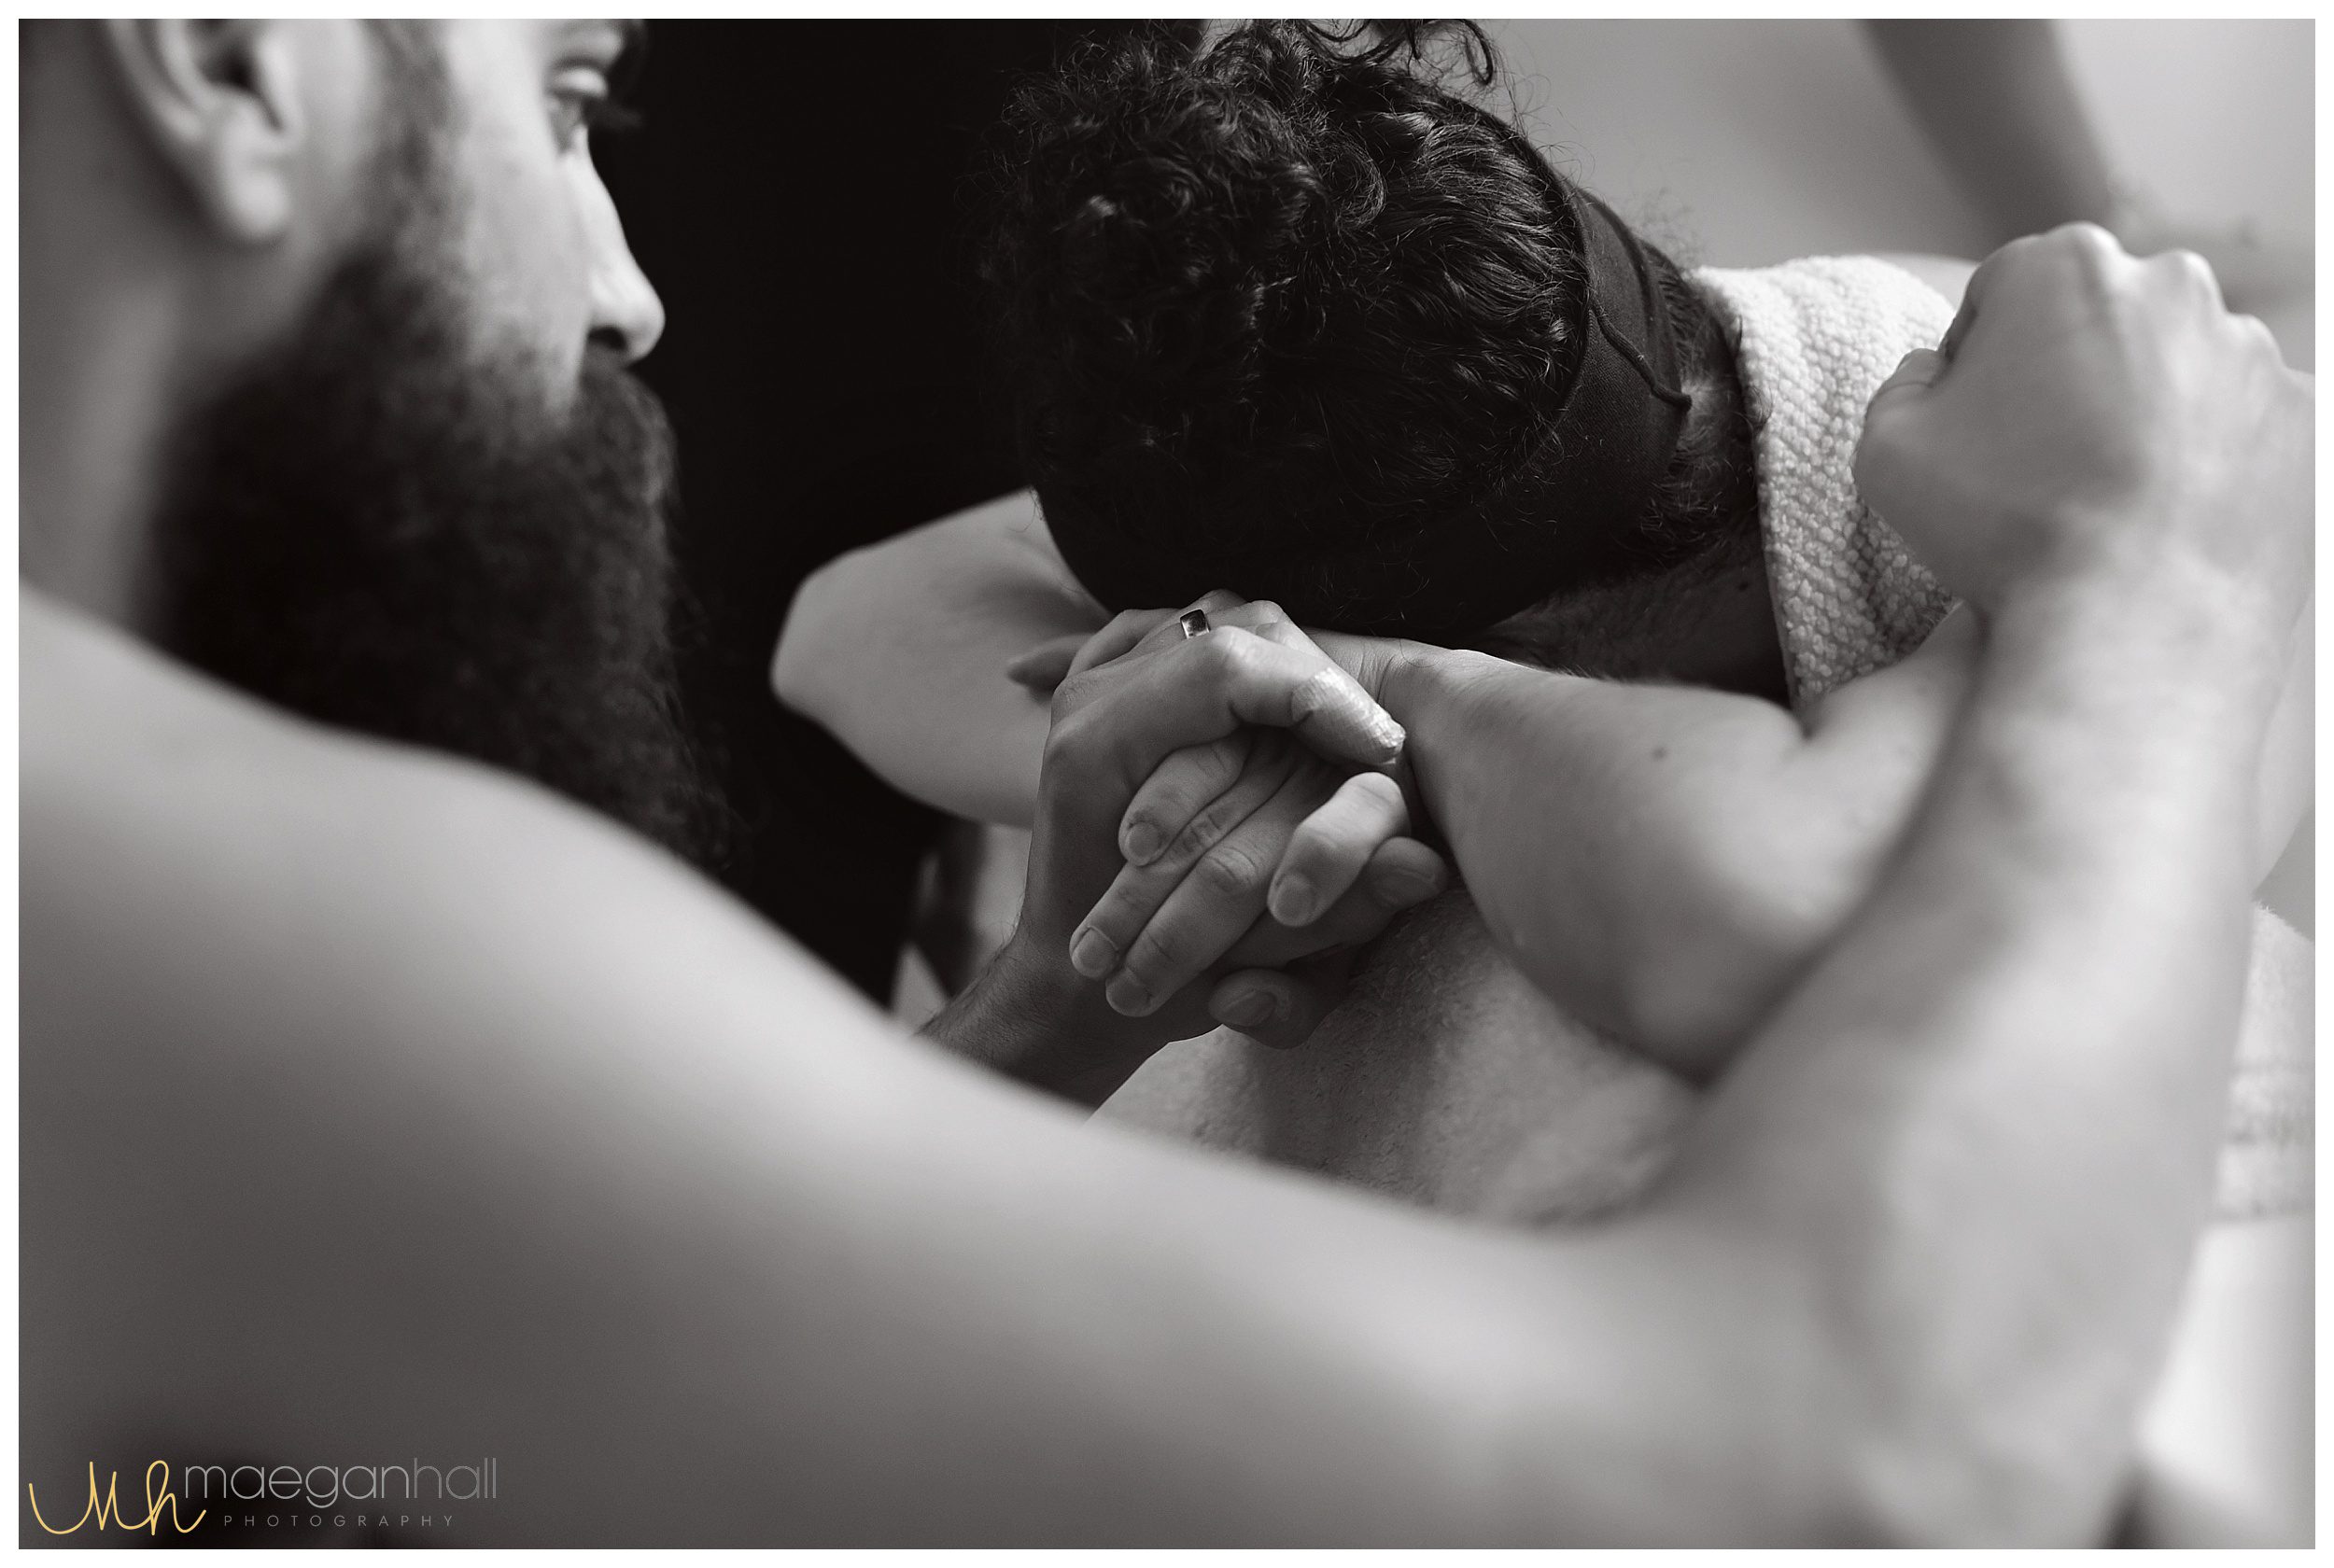 atlanta-home-birth-photography-pictures-dawning-life-midwifery-debbie-midwife-maegan-hall-canton-doula_0005